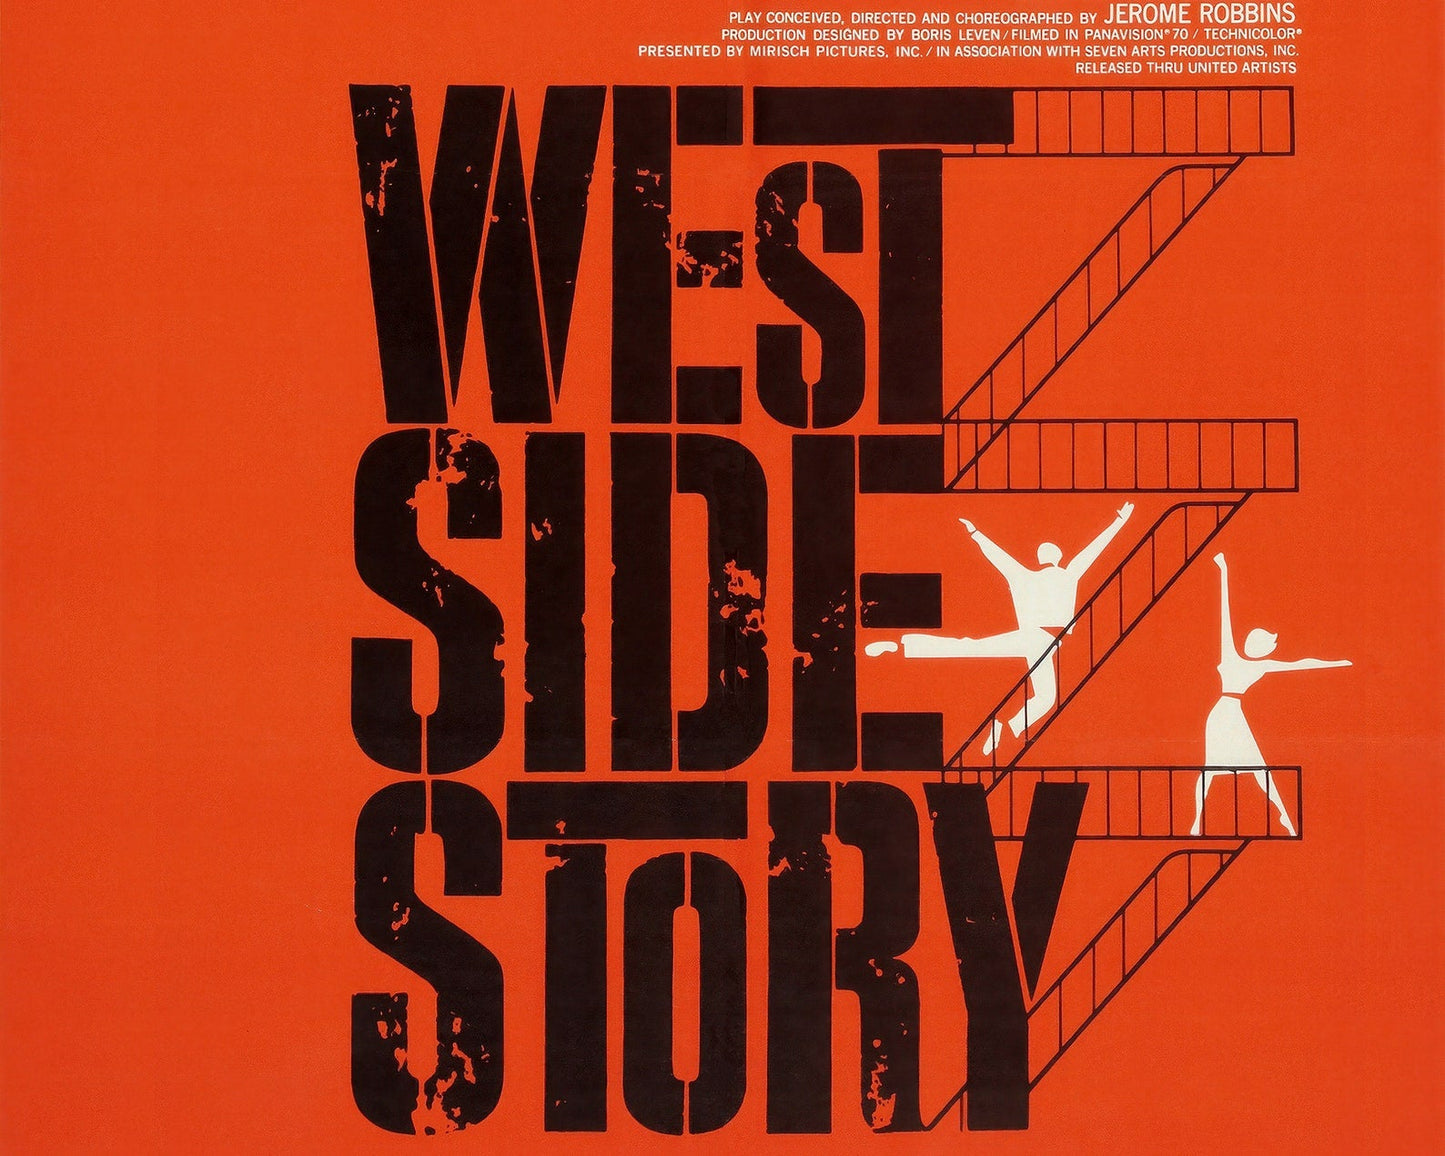 Vintage Movie Poster "West Side Story" (c.1961) - Mabon Gallery